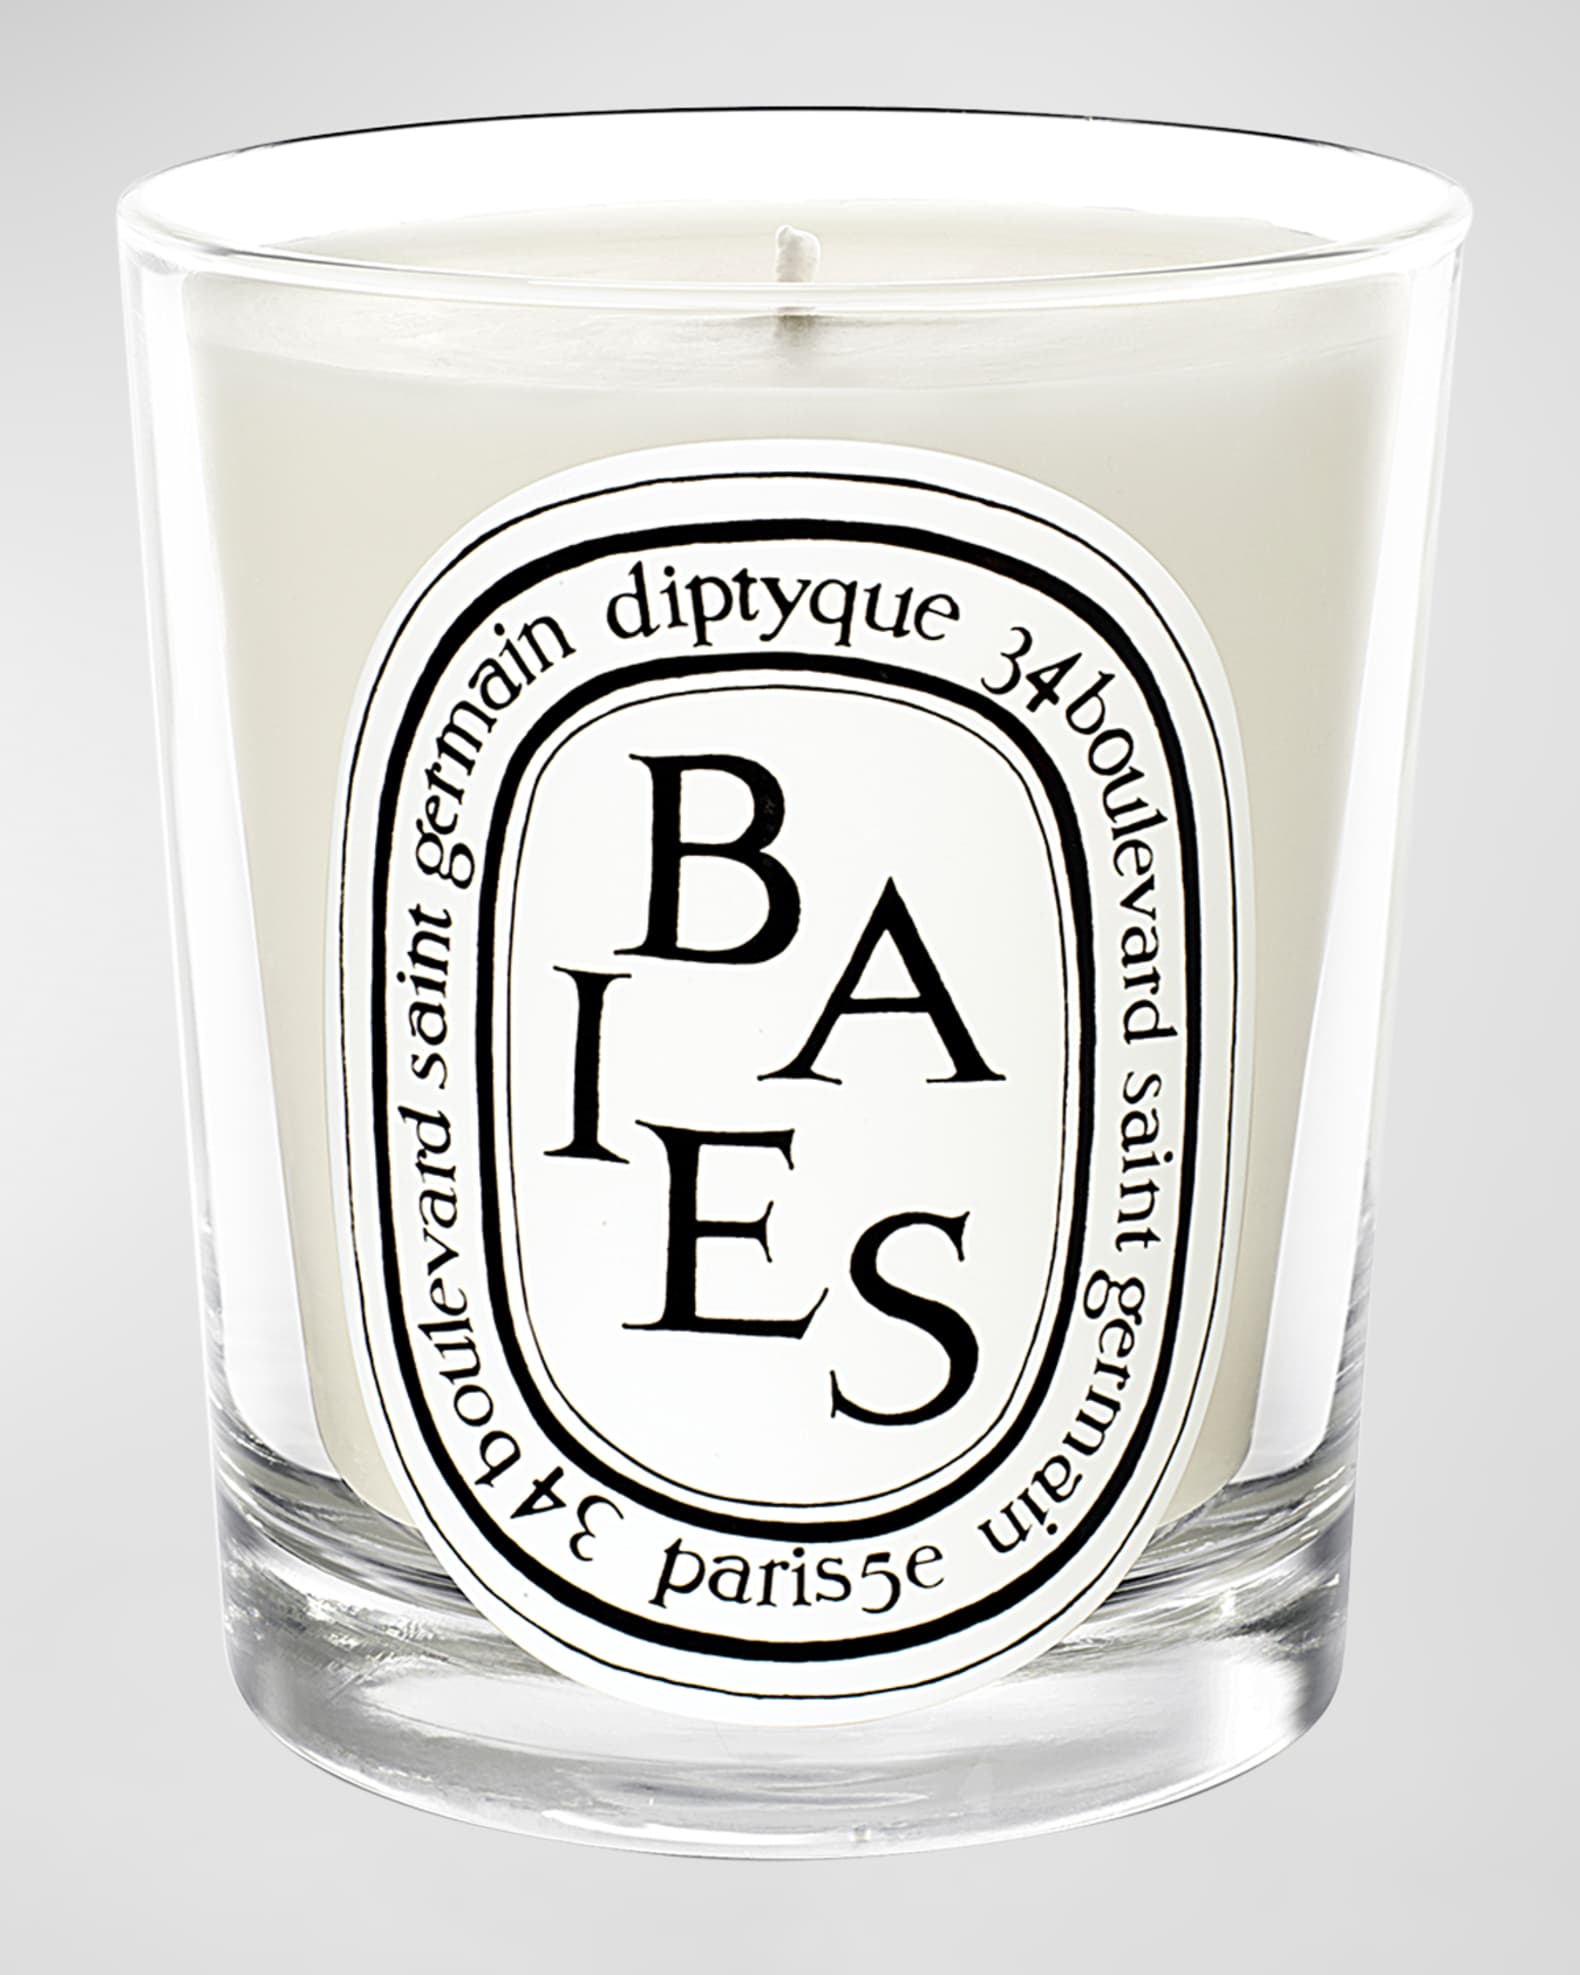 Baies (Berries) Scented Candle, 6.5 oz. | Neiman Marcus